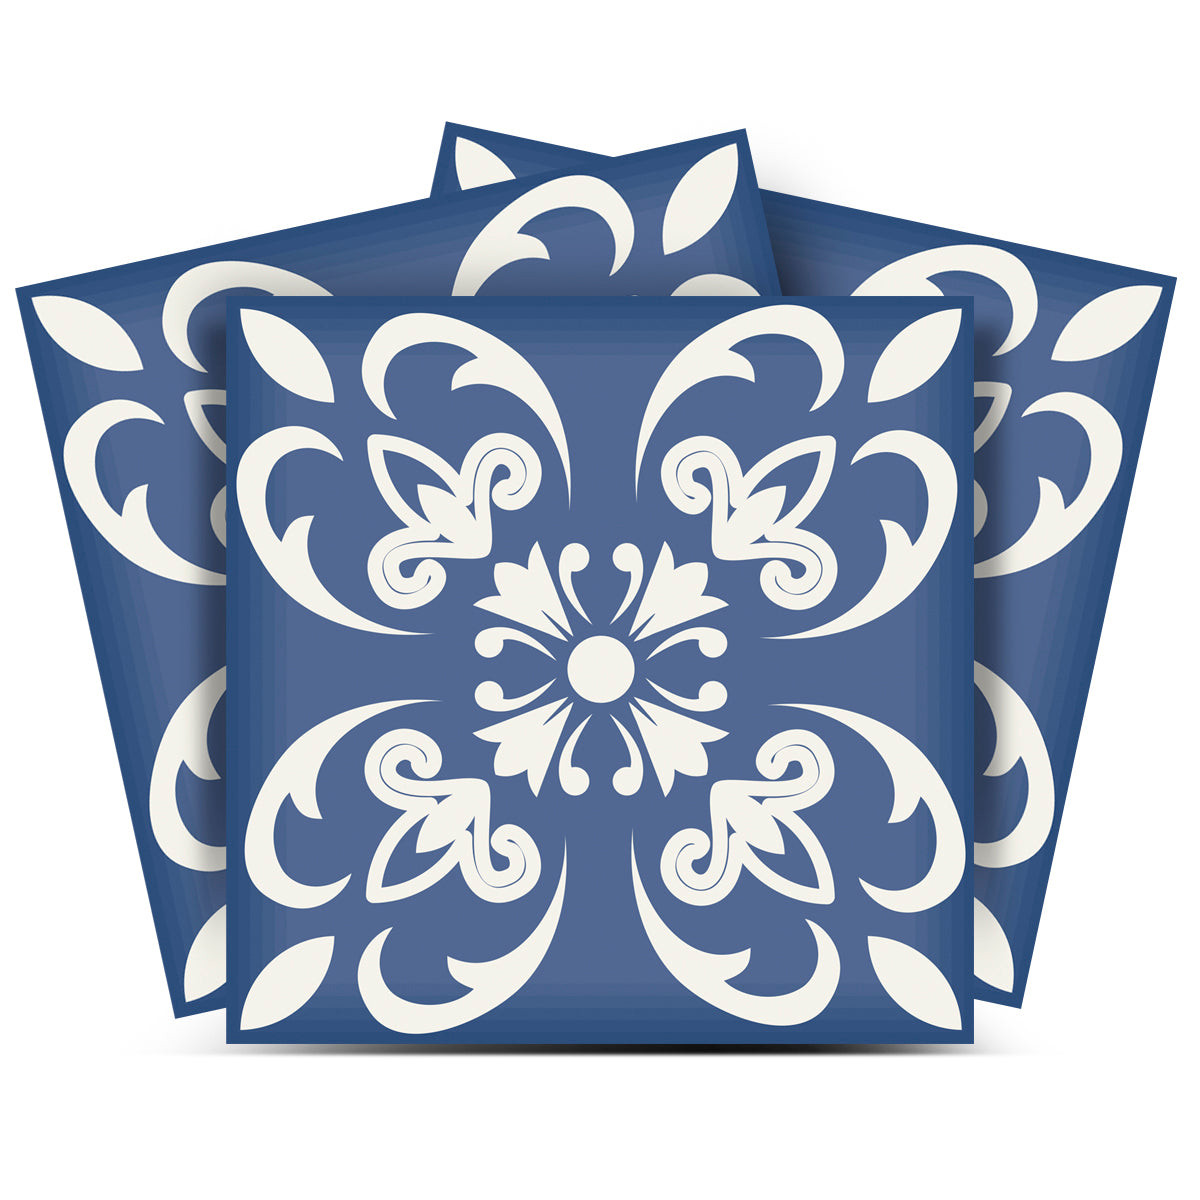 5" X 5" Wedgwood Blue And White  Peel And Stick Removable Tiles-390889-1